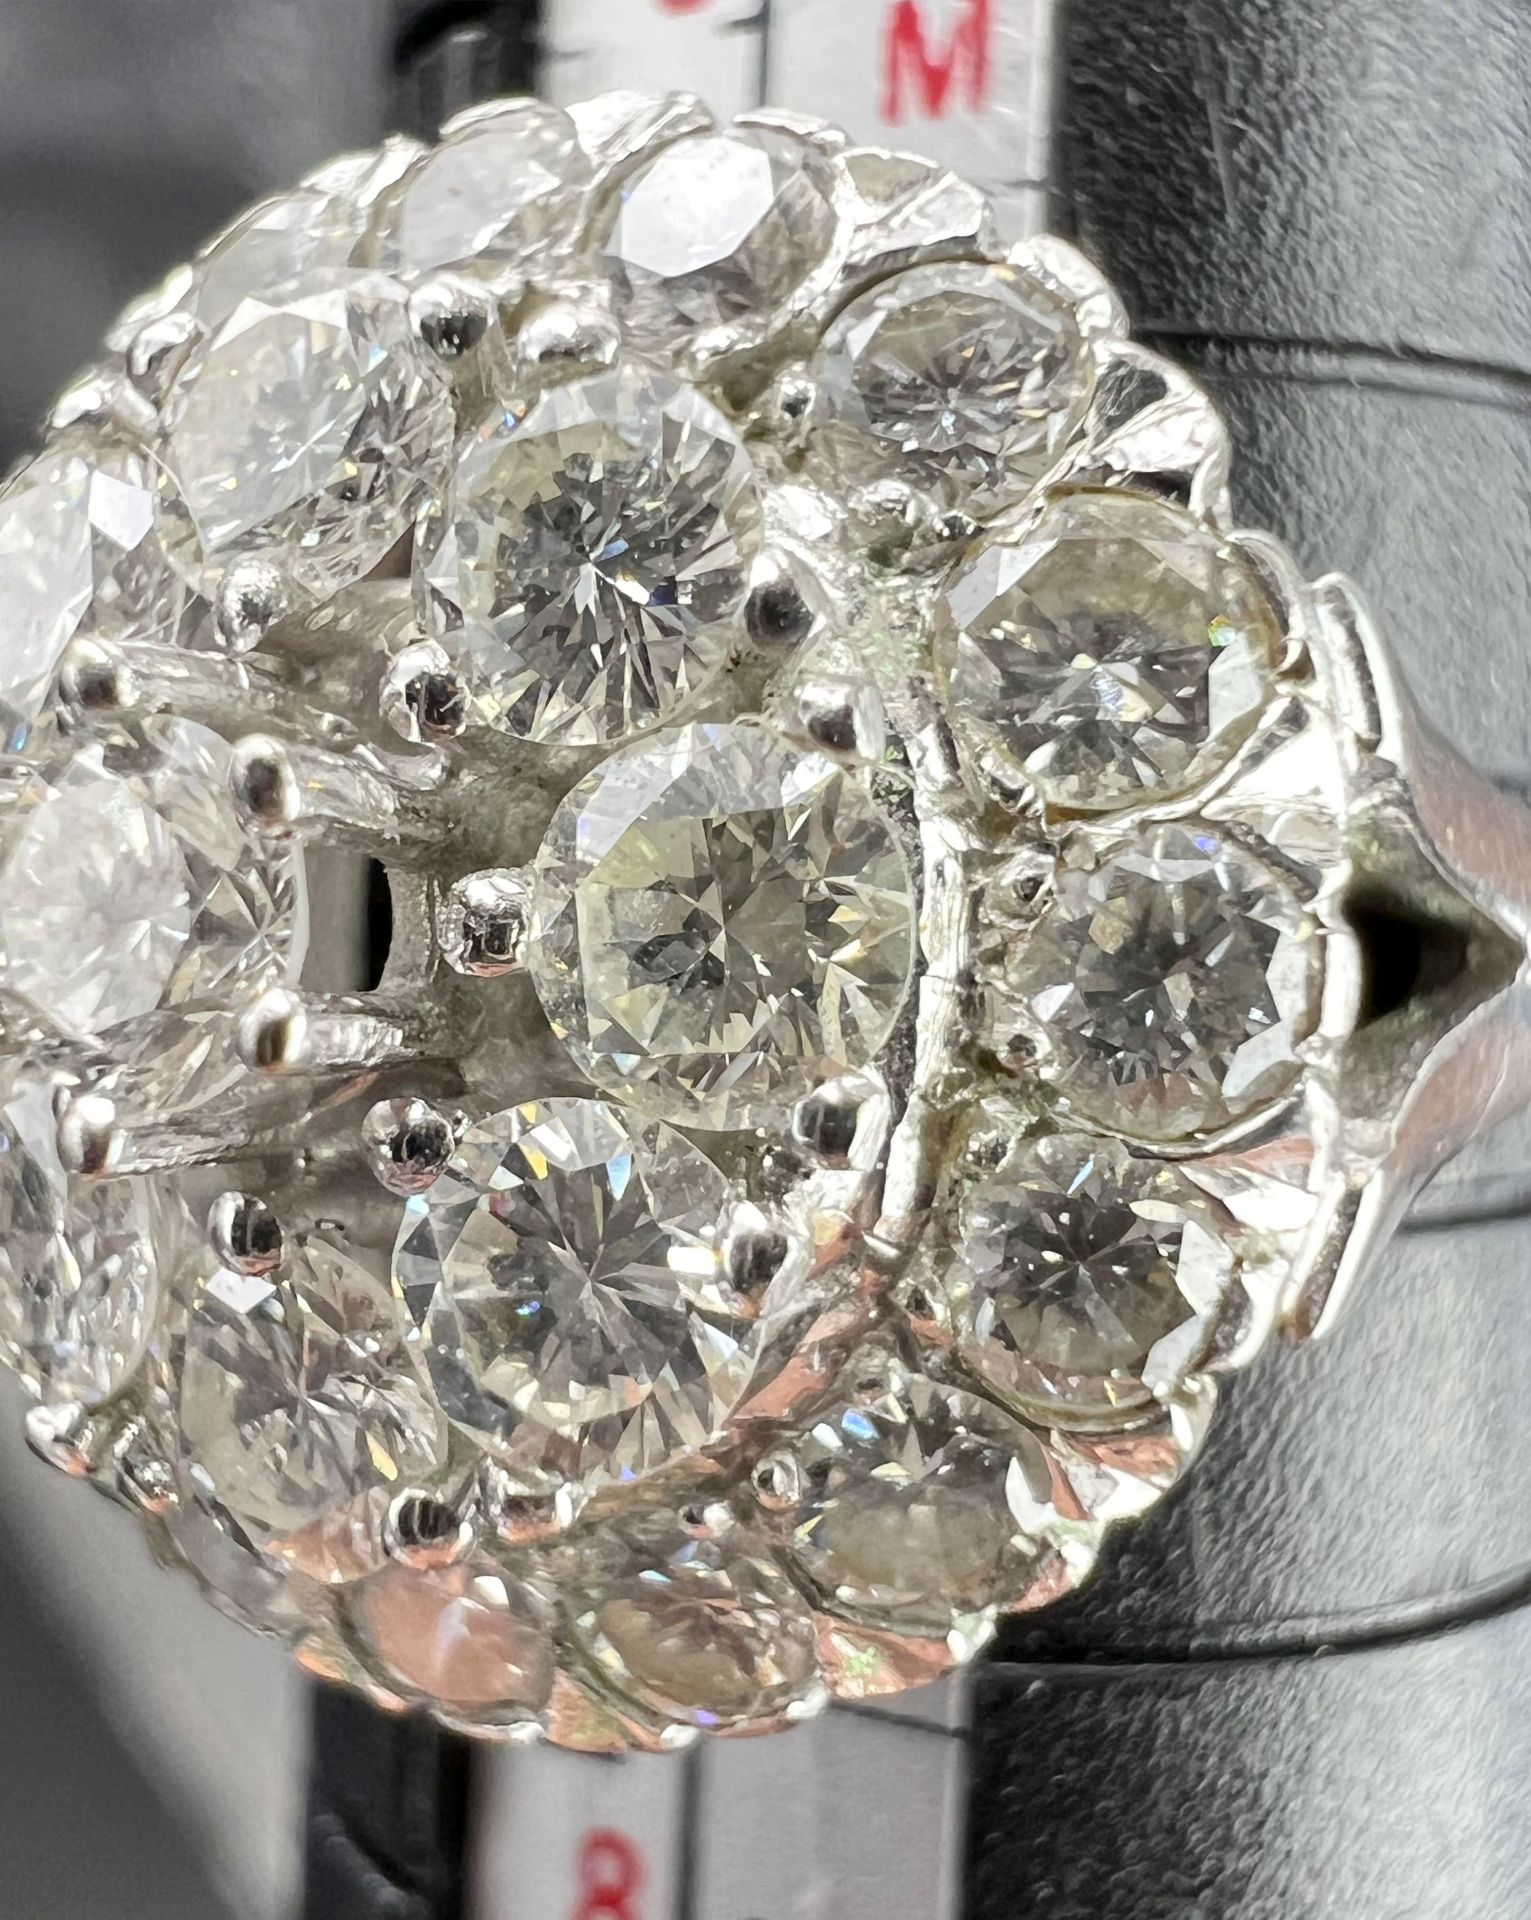 Ladies' ring 585 white gold with 25 diamonds. - Image 9 of 11